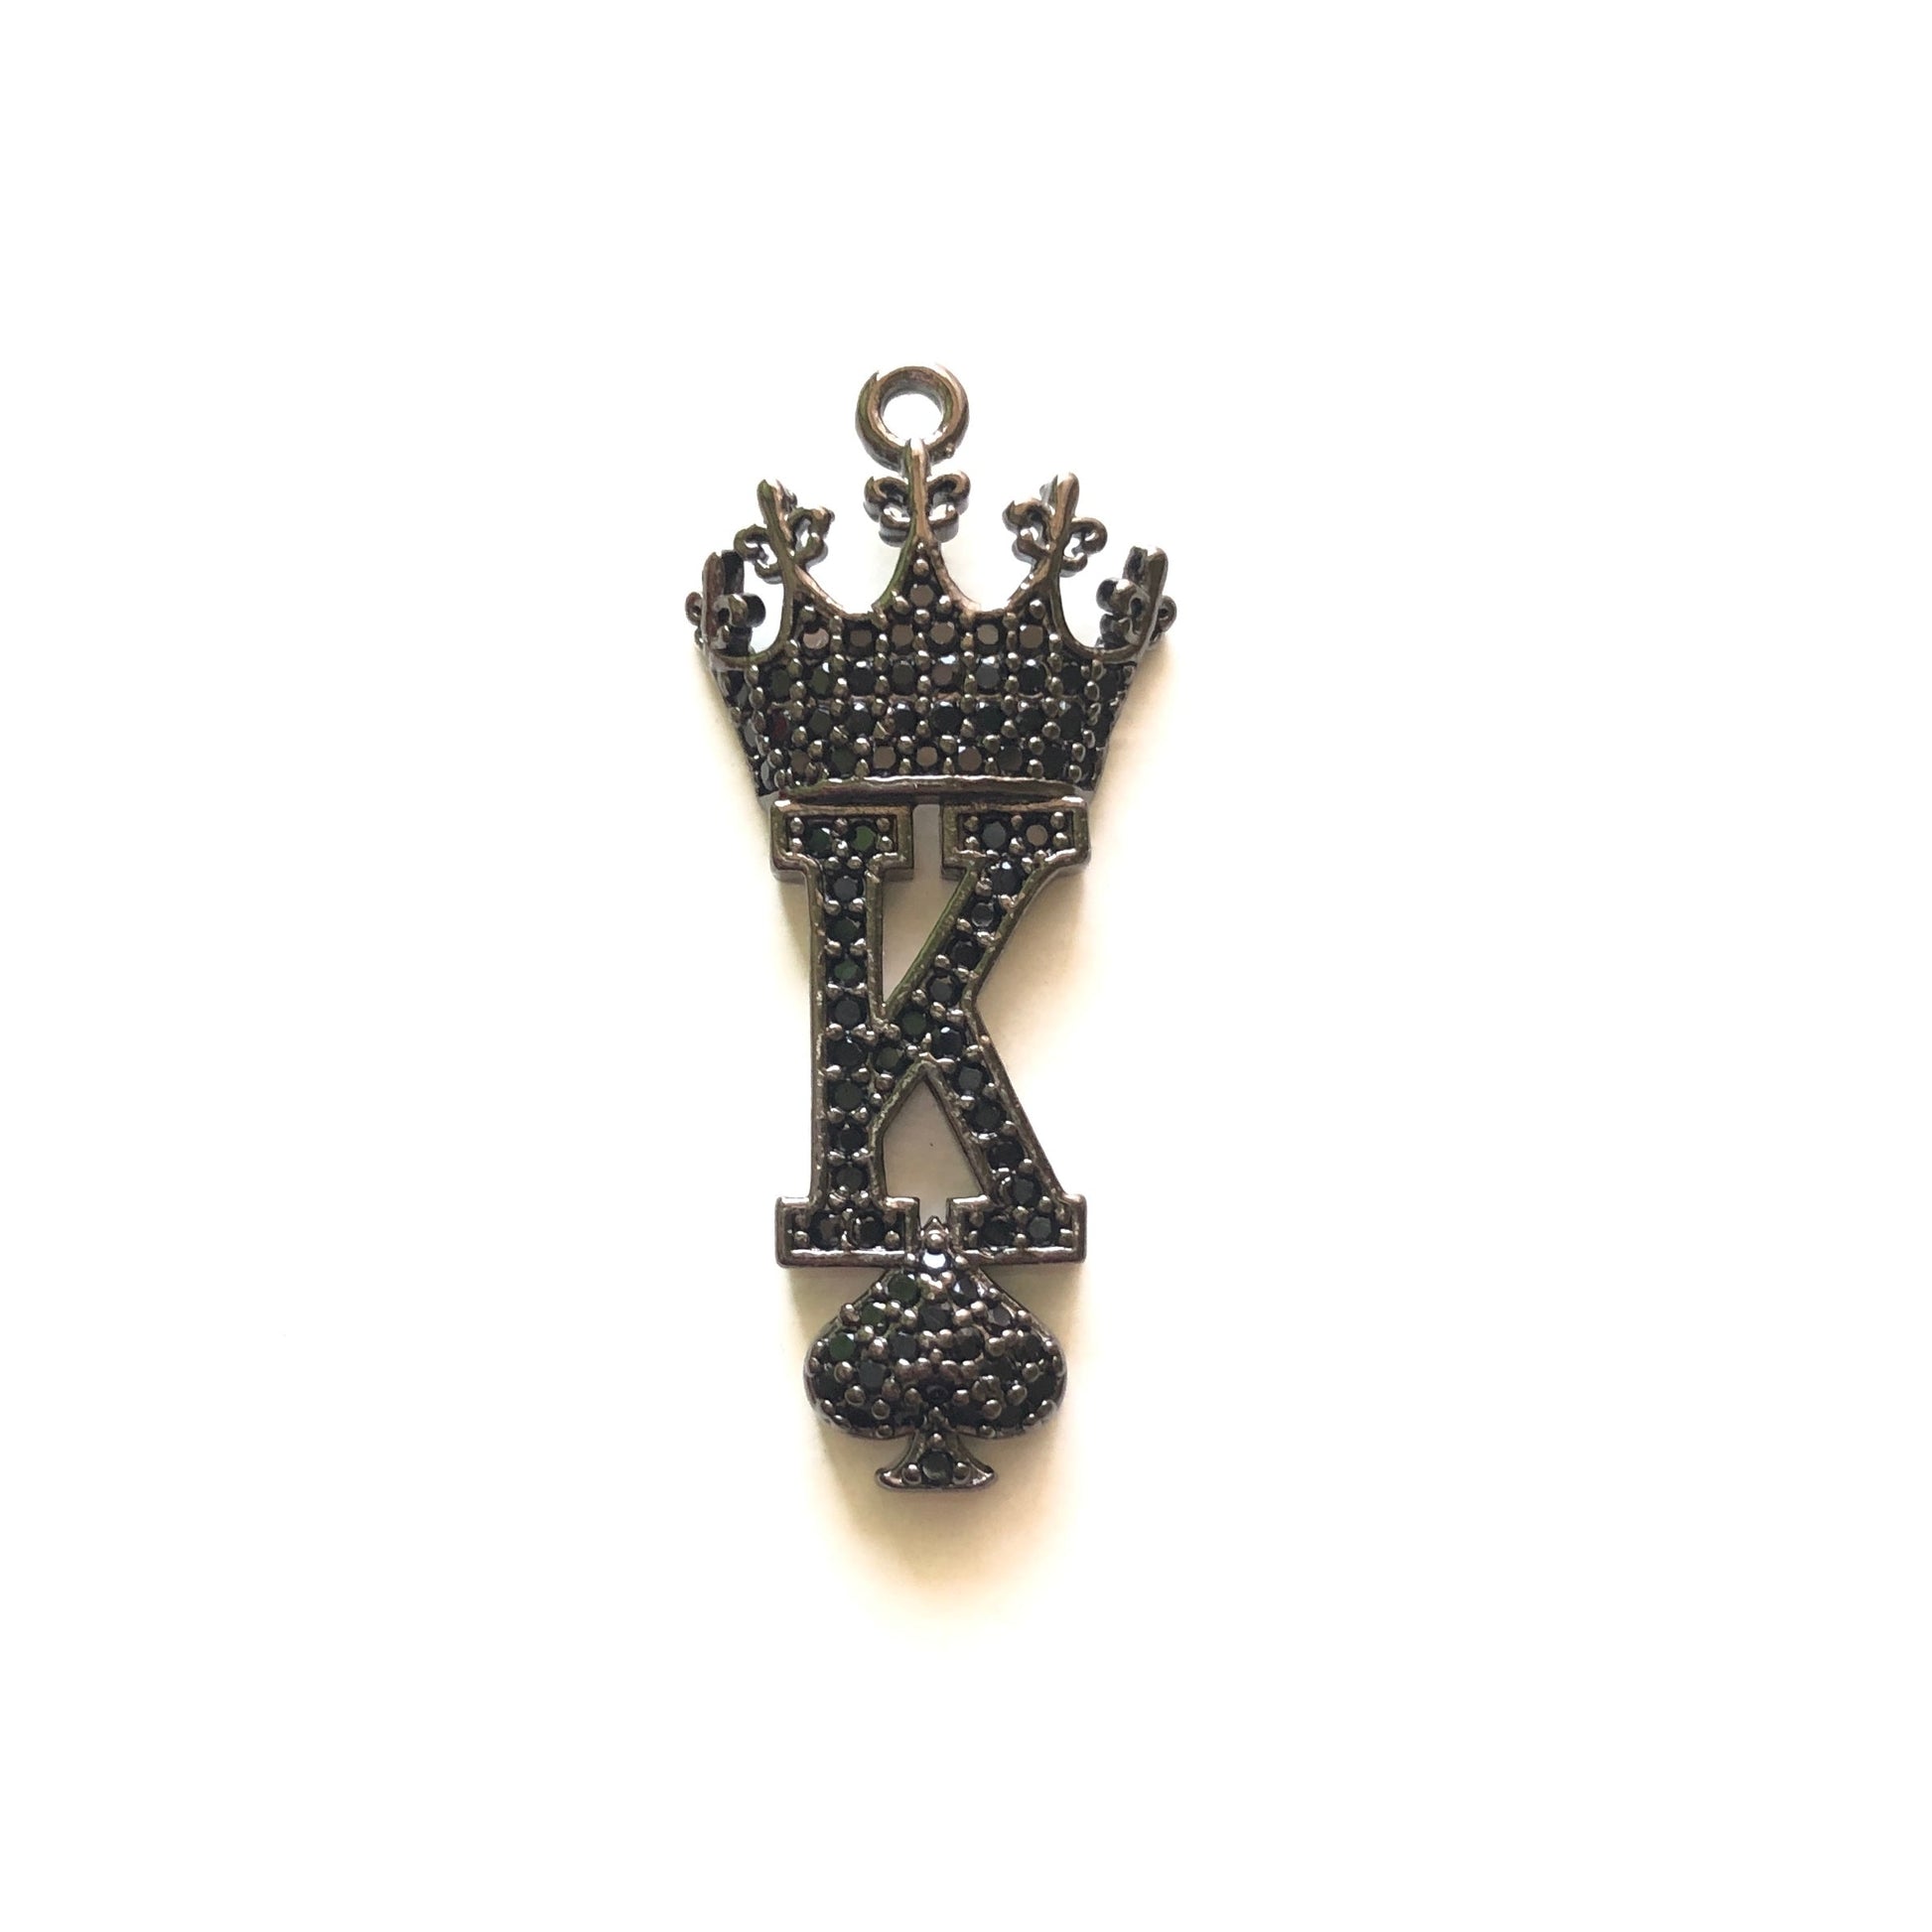 10pcs/lot 34*15mm CZ Paved King of Spades Charms Black on Black CZ Paved Charms Queen Charms Words & Quotes Charms Beads Beyond